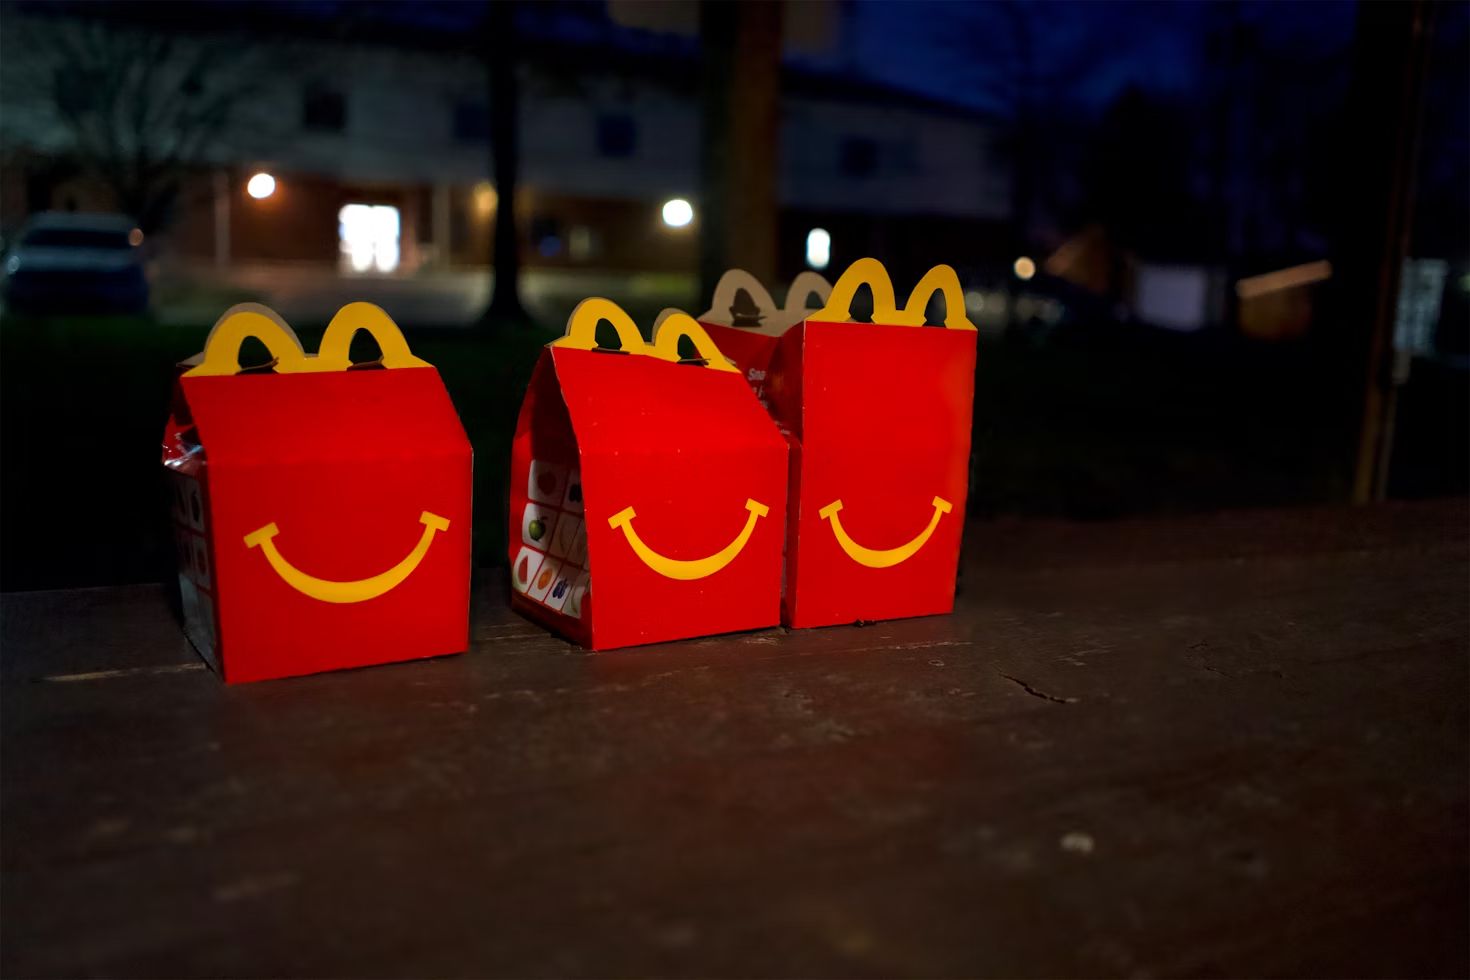 Rediscovering ‘I’m loving it’: How McDonald’s leveraged nostalgia to regain the cool factor